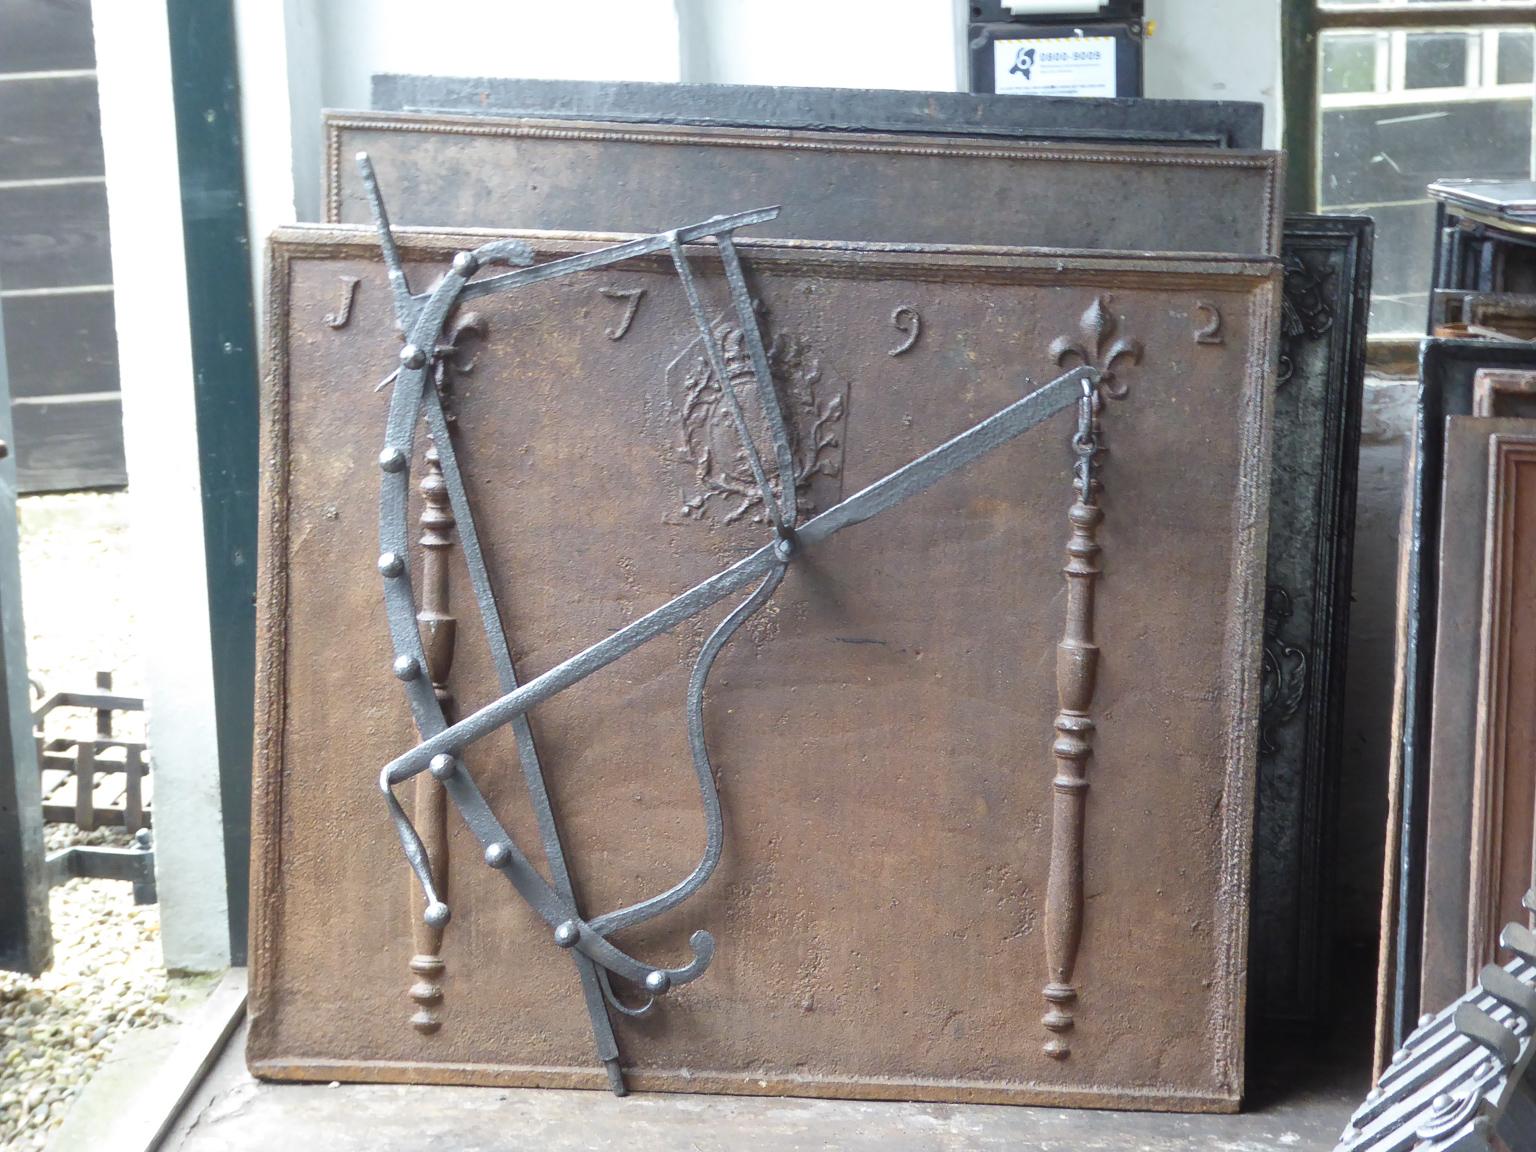 17th- 18th century Dutch fireplace crane made of wrought iron. The crane is still functional for cooking in the fireplace.

This product has to be shipped as freight due to its size and/or (volumetric) weight. You can contact us to find out the